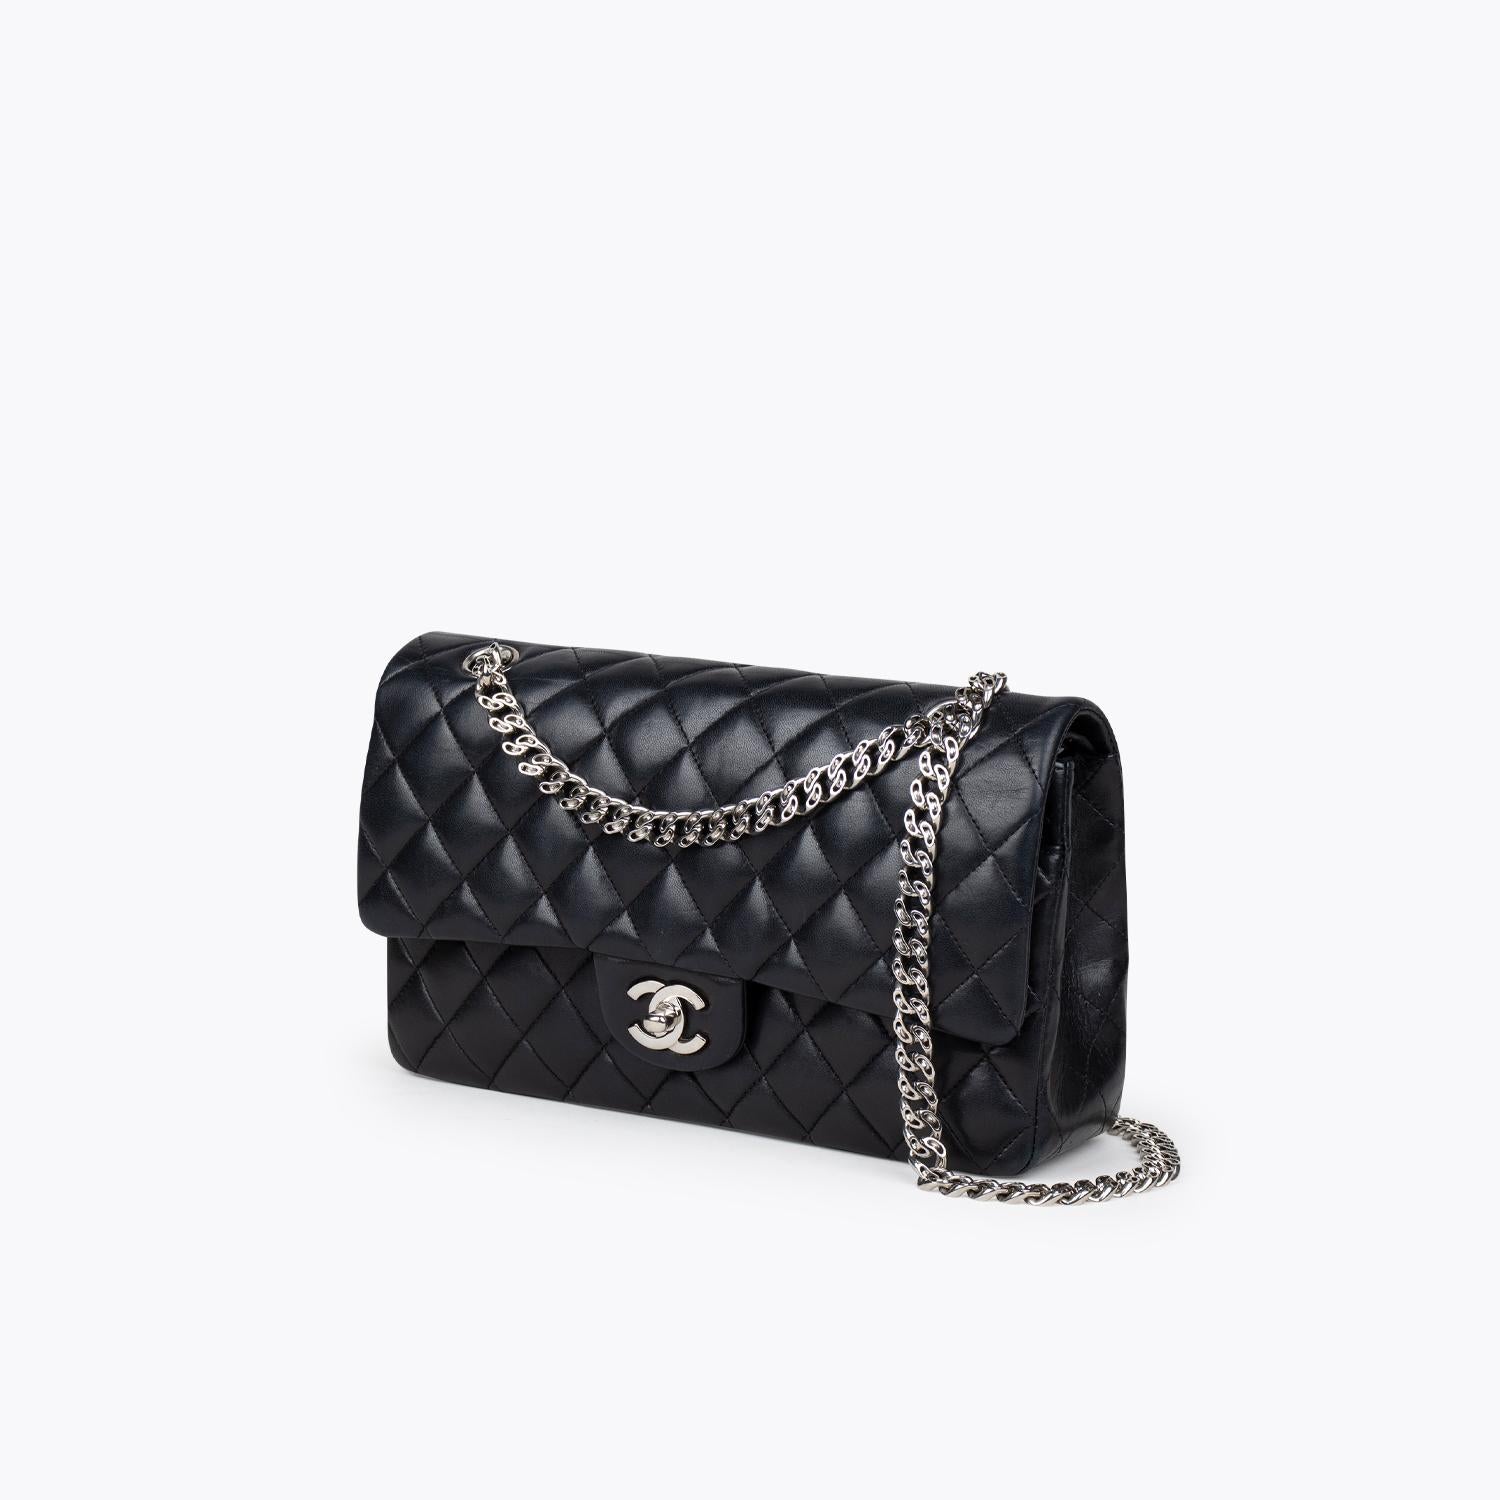 Limited Black quilted lambskin Bijoux Chain Chanel Medium Classic/Timeless Double Flap bag with

– Silver-tone hardware
– Convertible chain-link Bijoux shoulder strap
– Tonal leather lining
– Single patch pocket at back
– Single zip pocket at flap